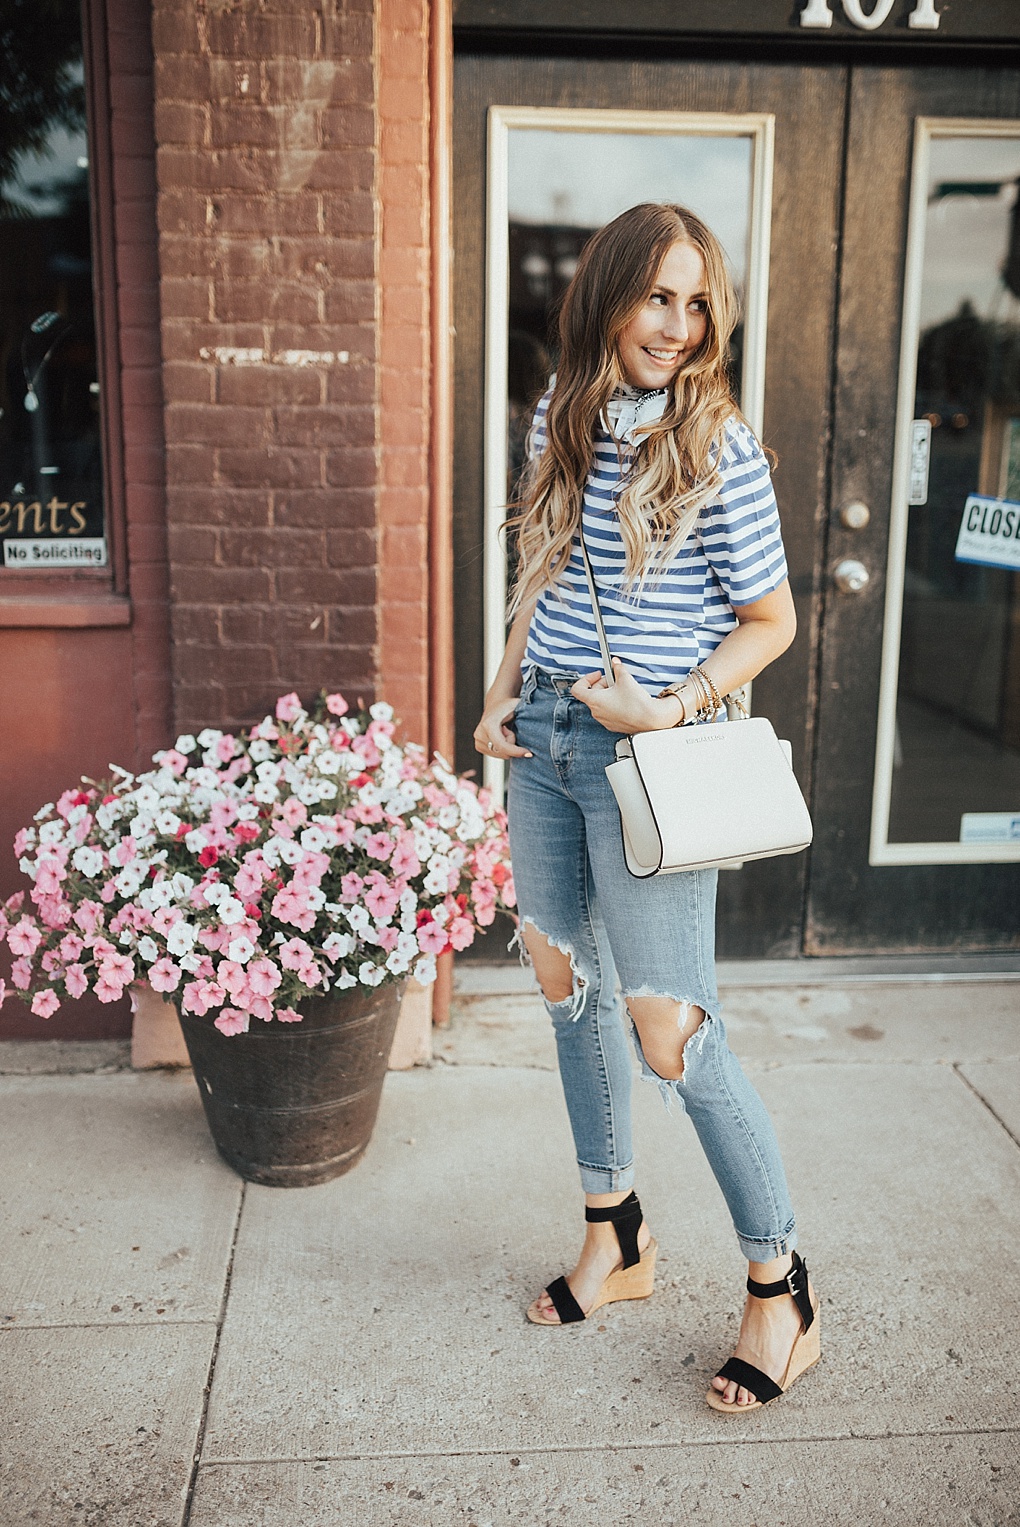 9 Ways To Wear Basic Tees For Fall by Utah fashion blogger Dani Marie